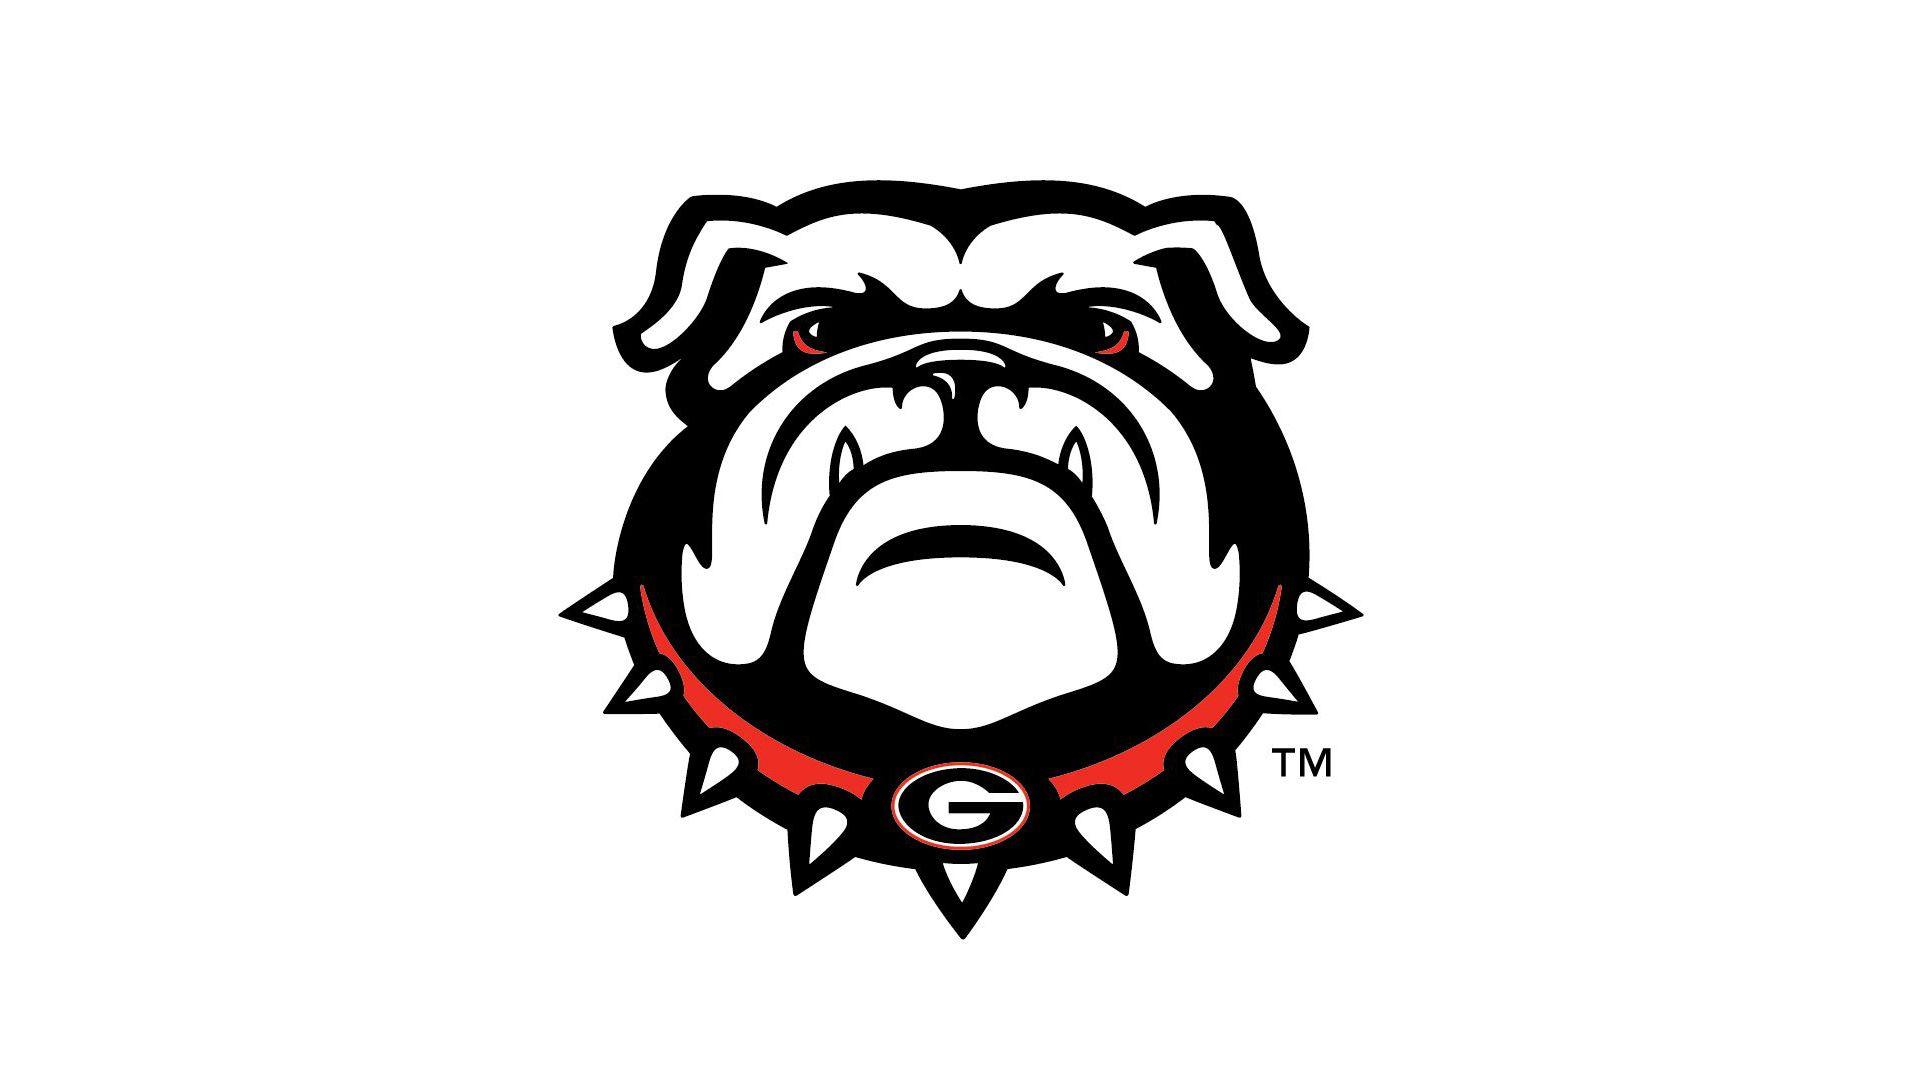 Bulldog Logo - Georgia Bulldogs Logo, Georgia Bulldogs Symbol, Meaning, History